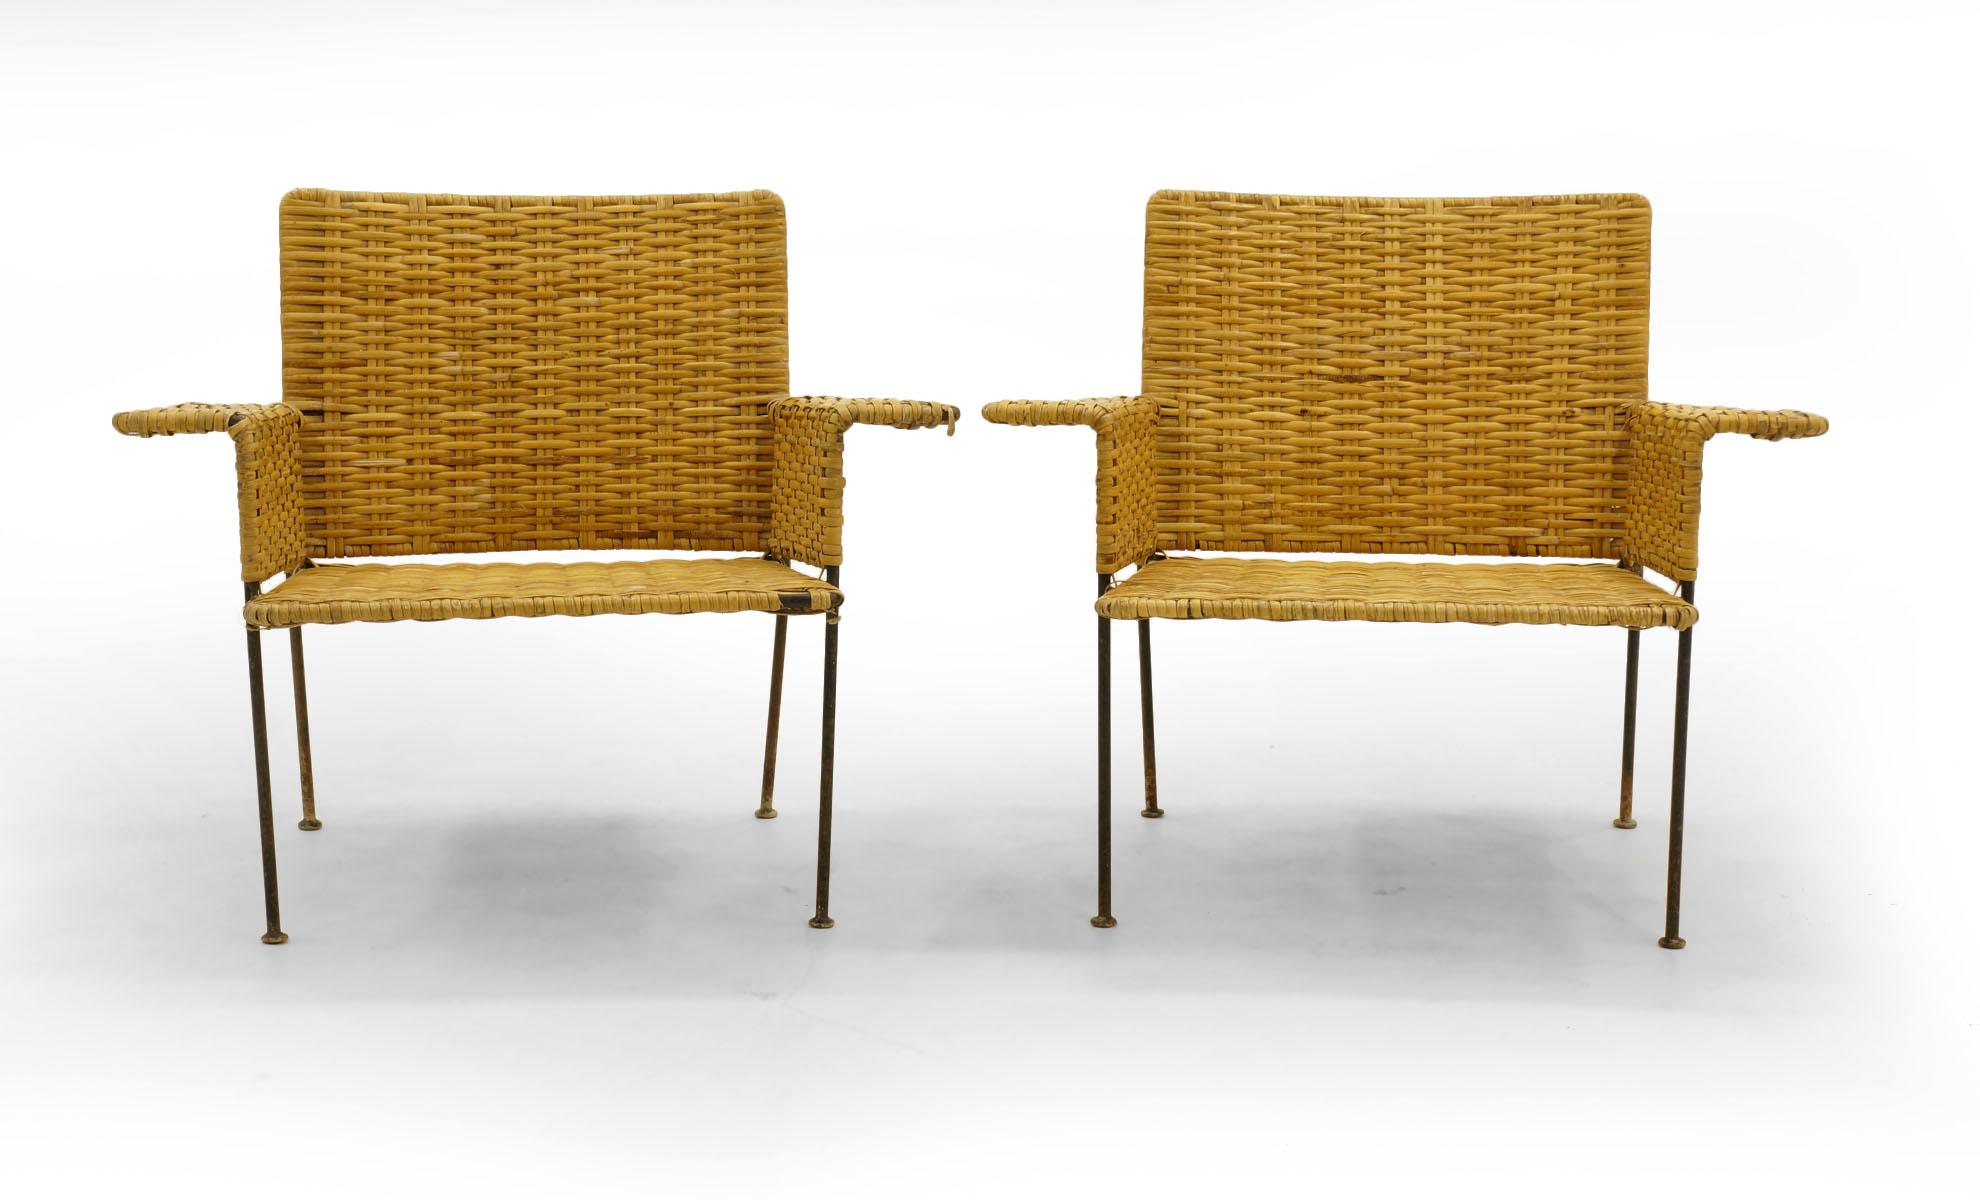 American Pair of Wicker and Wrought Iron Chairs by Van Keppel and Green, 1950s